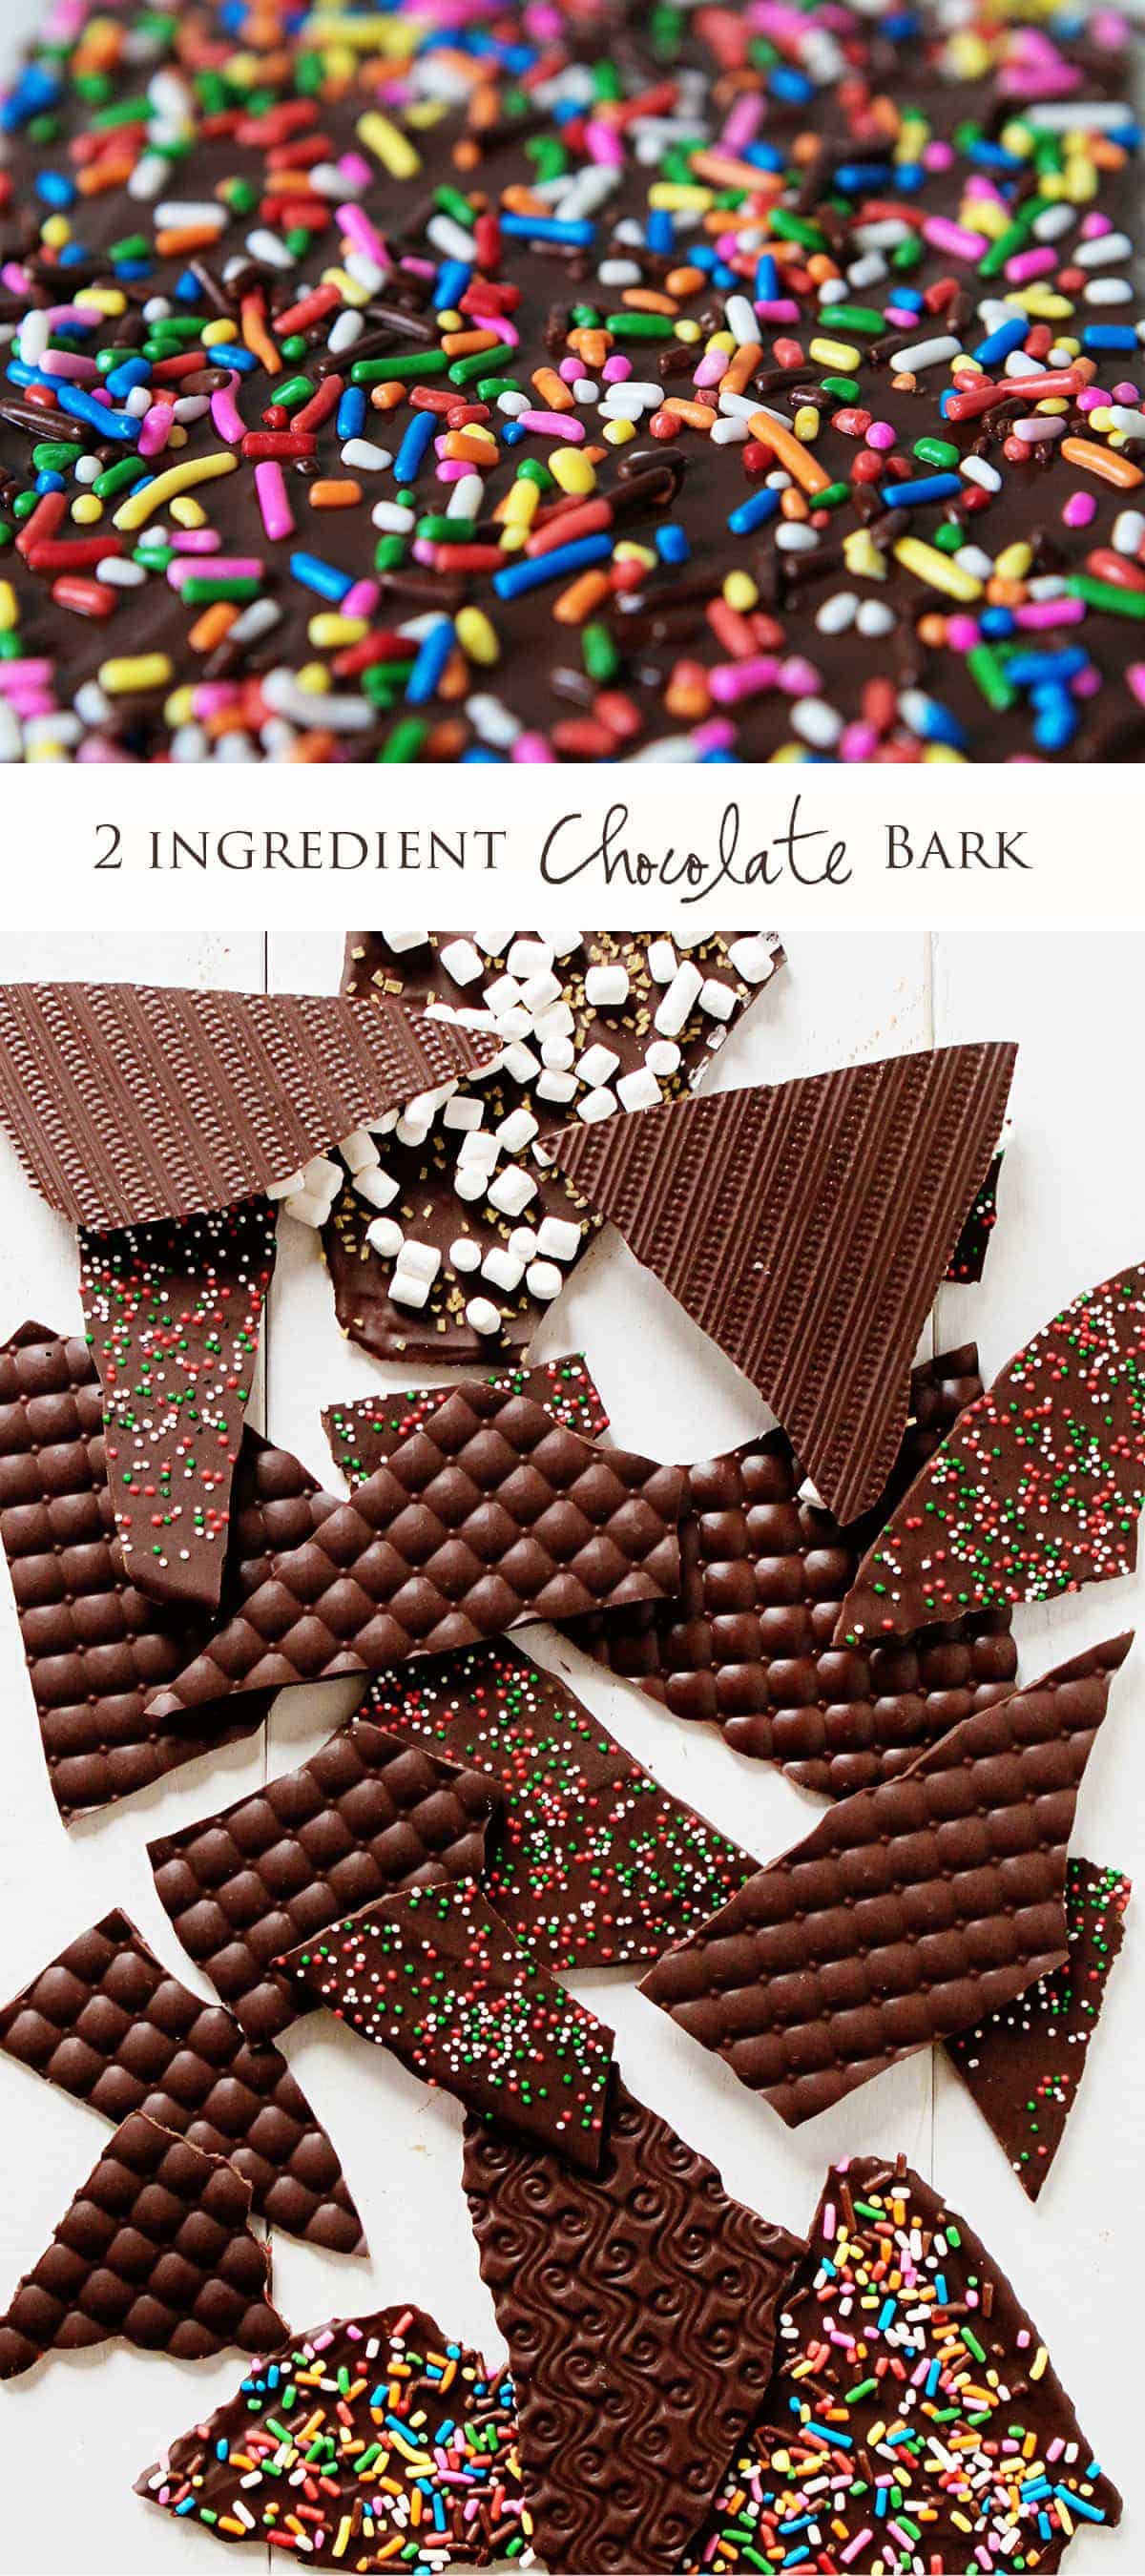 Making Chocolate Bark decorative is a LOT easier than you would think!